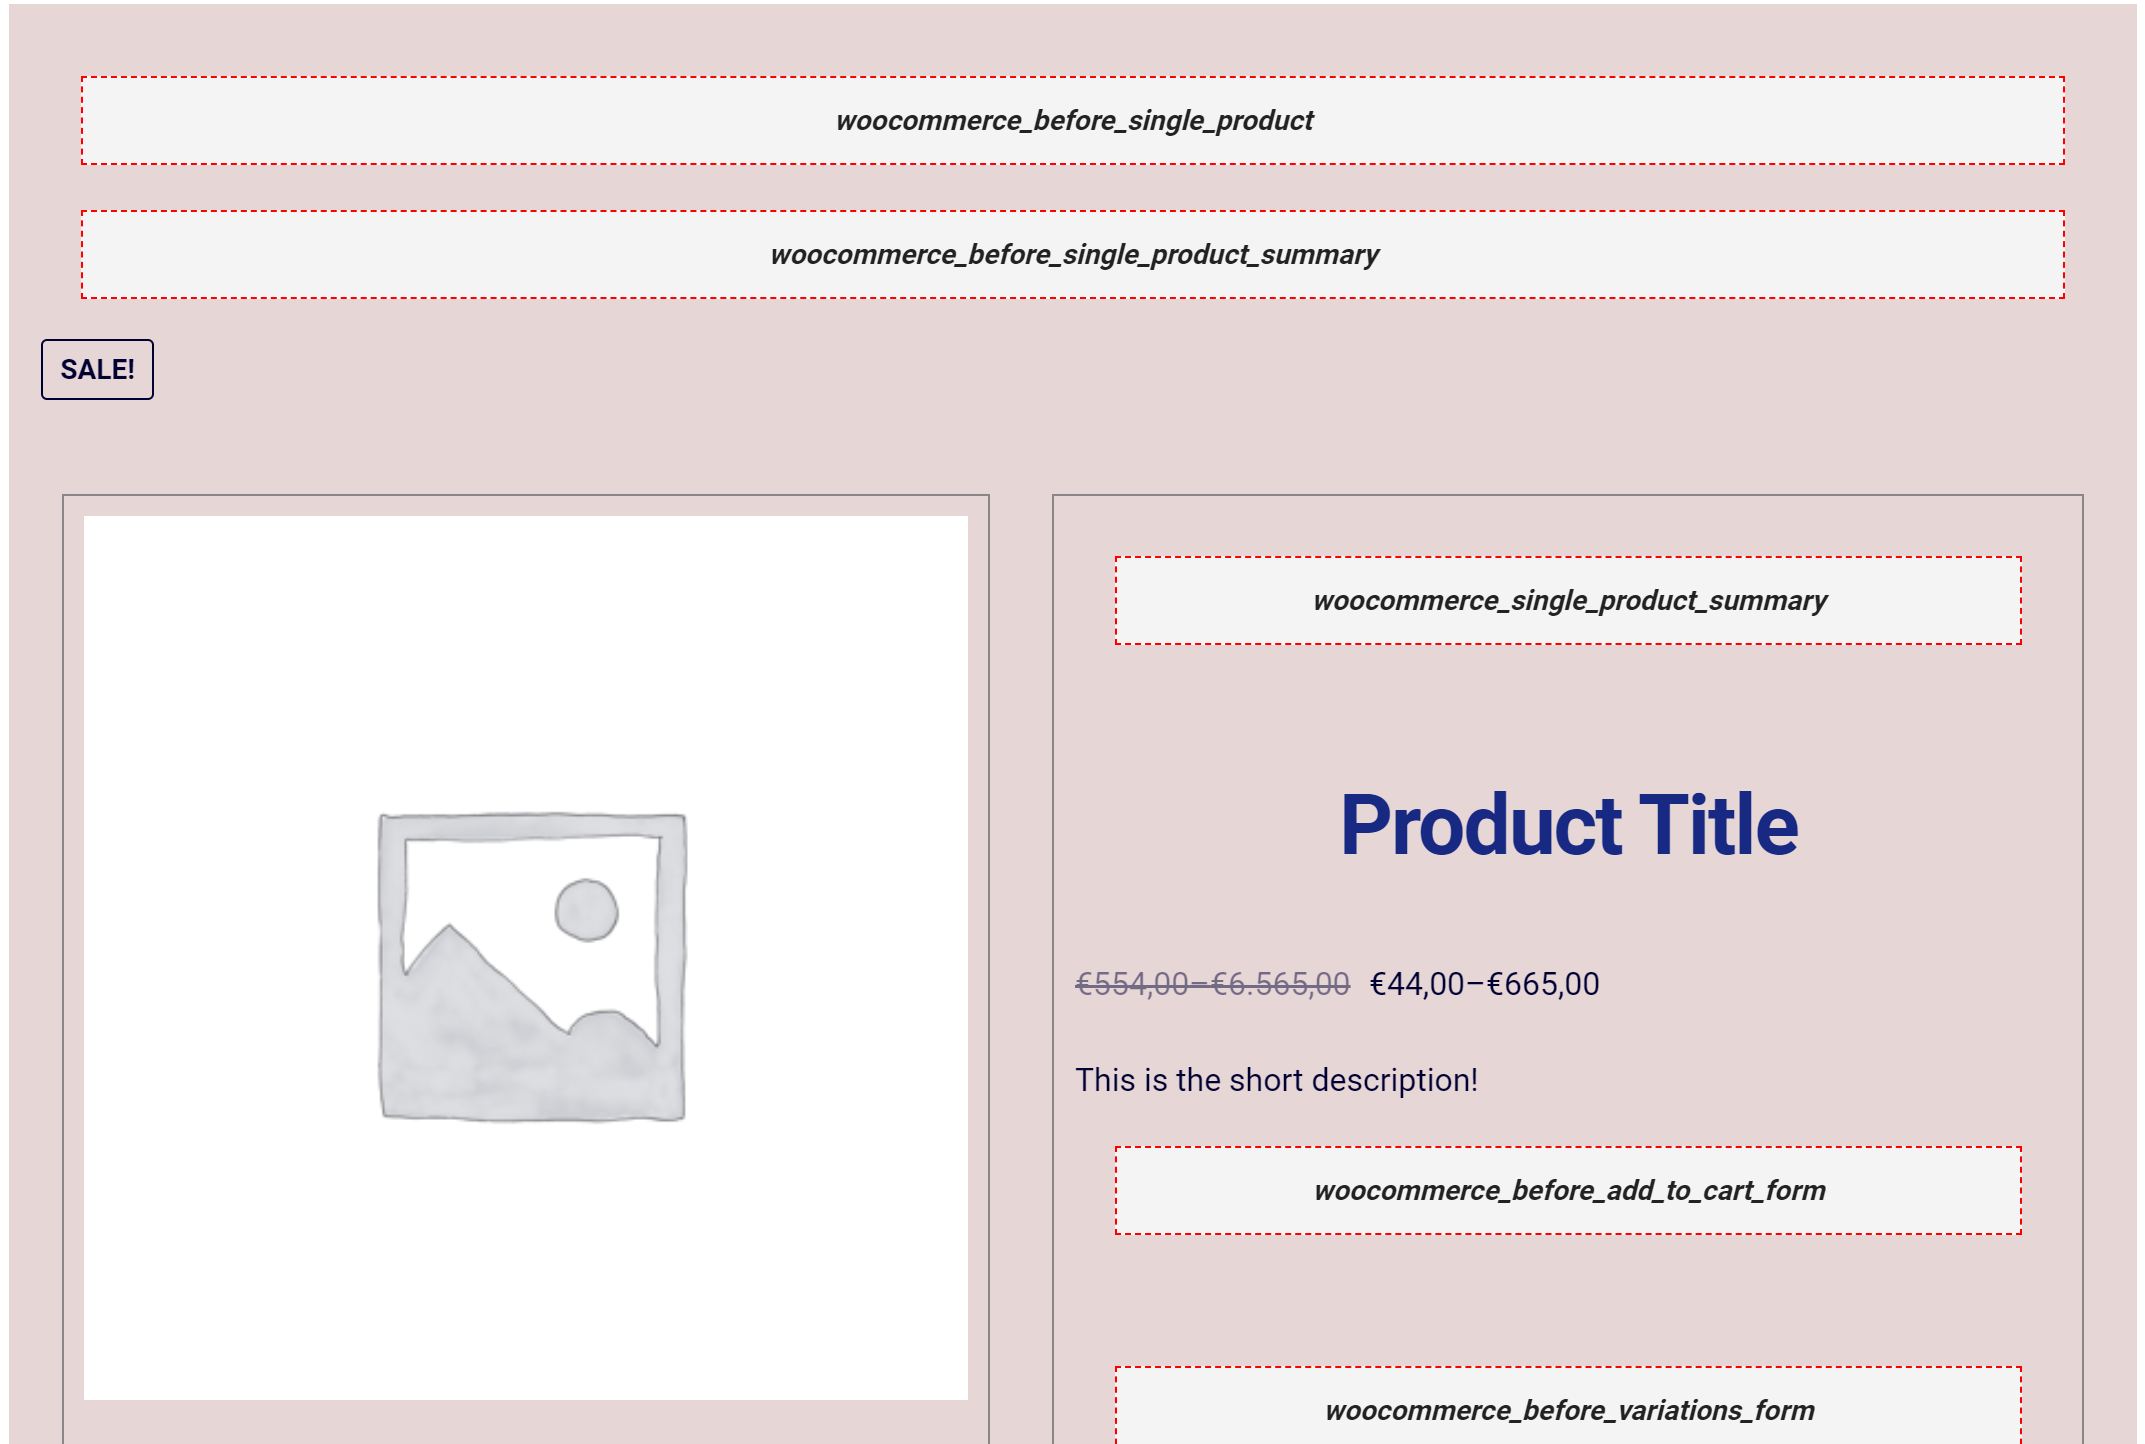 Woocommerce Hooks- Actions & Filters